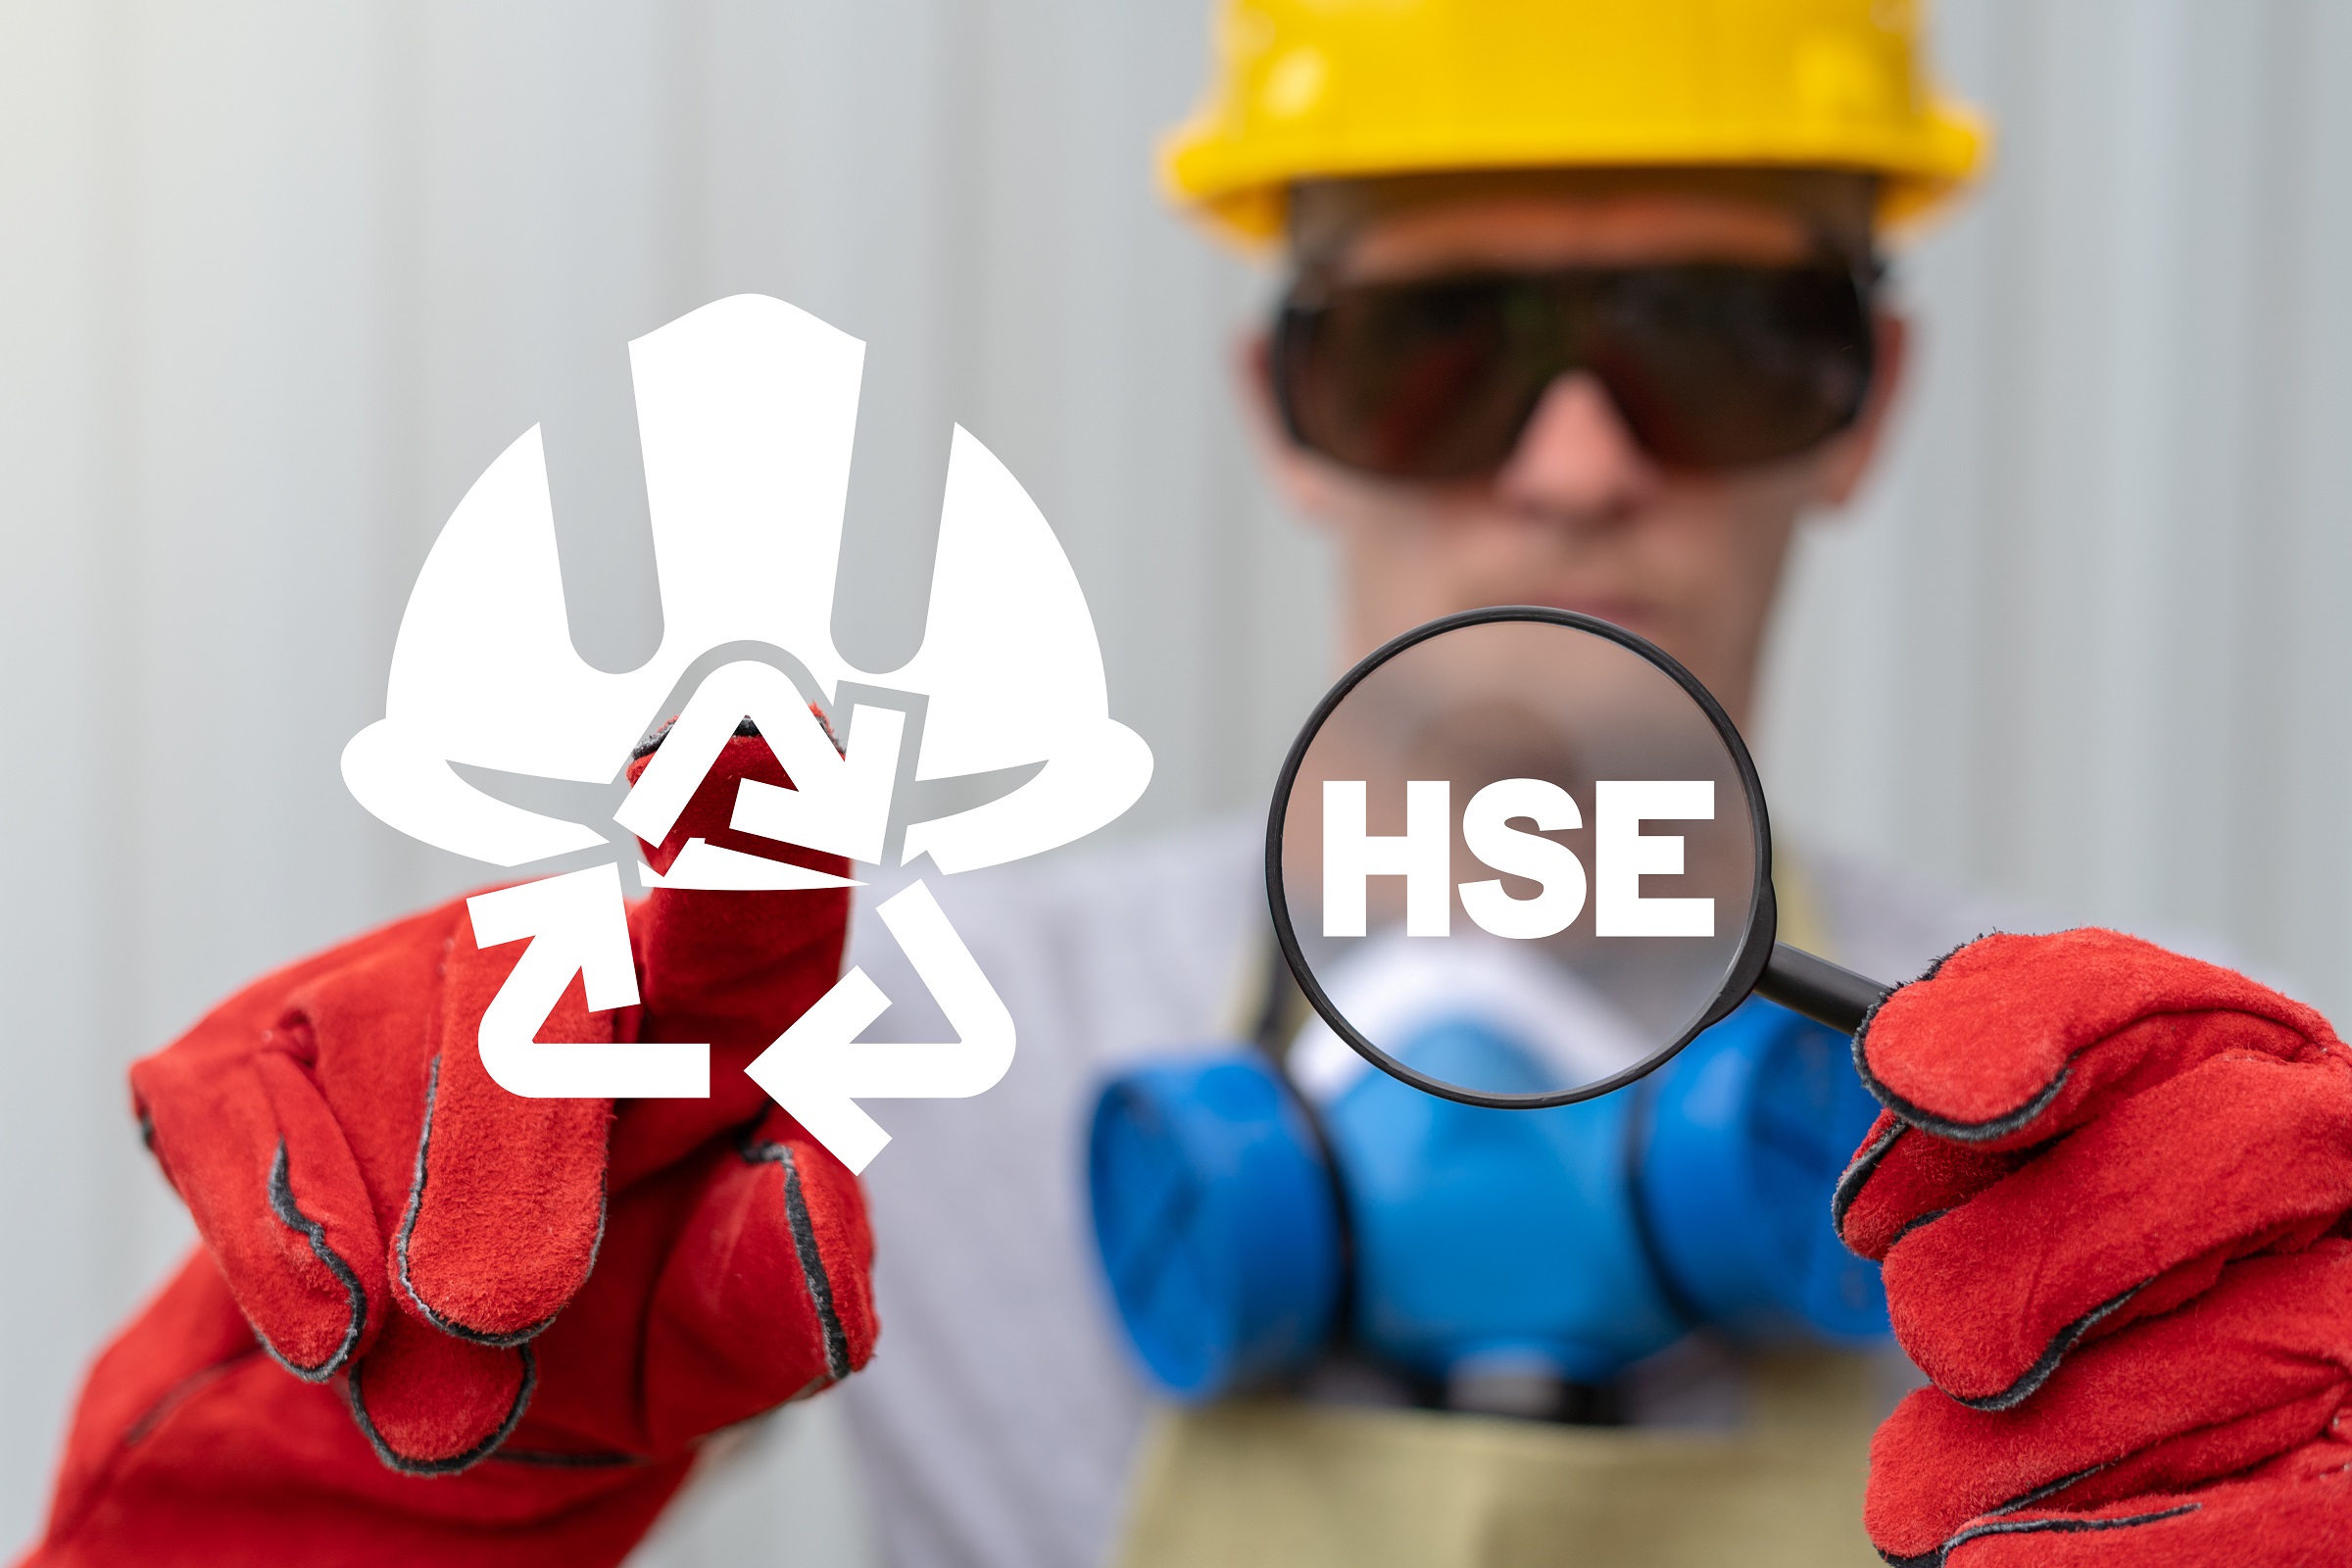 Hazardous Safety: Flexible SOPs and Accurate Risk Assessments